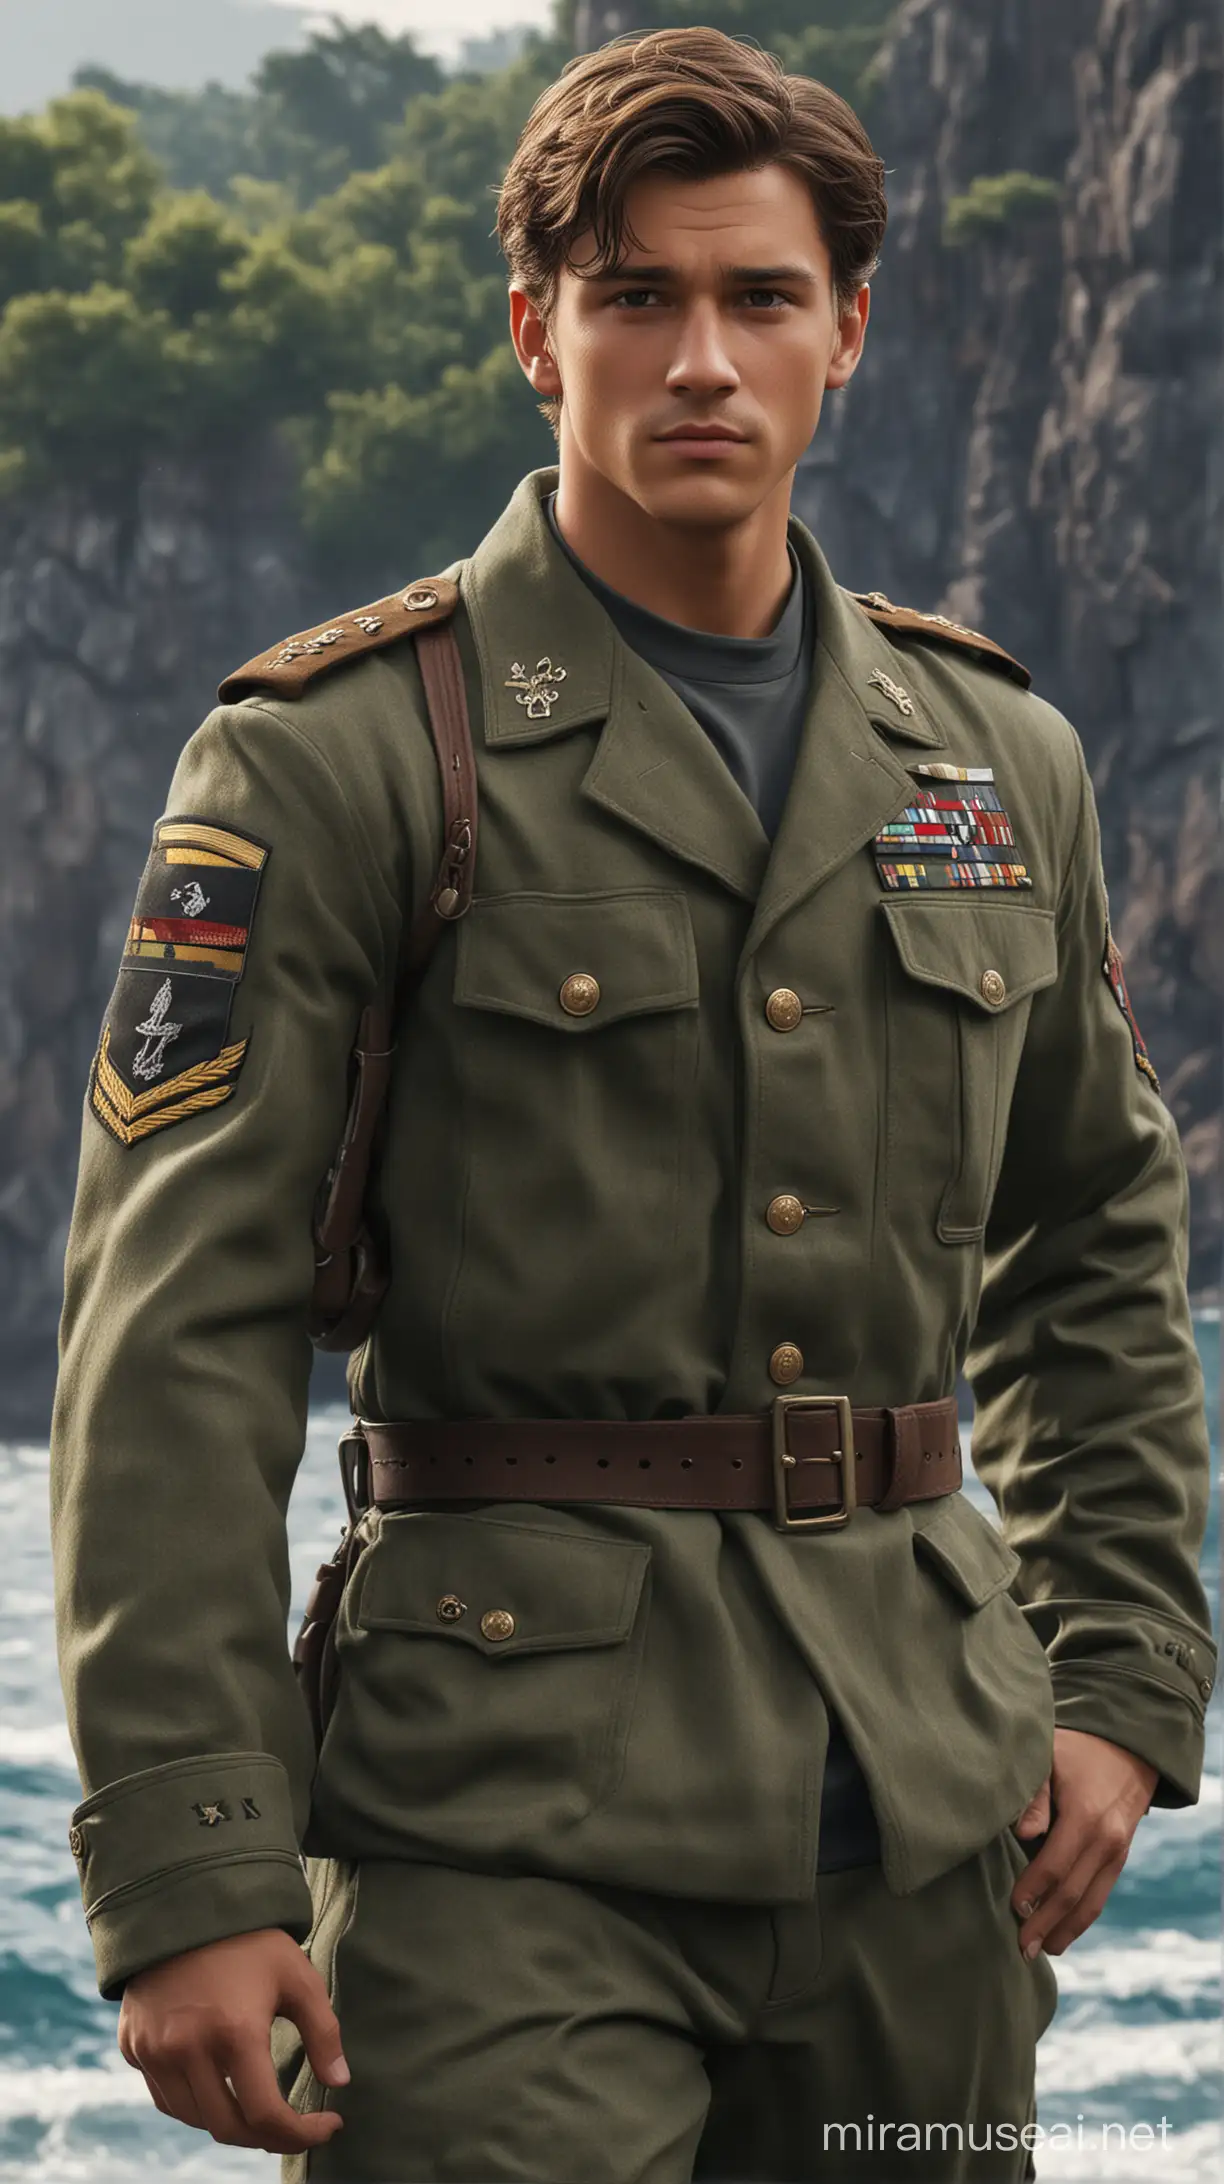 Flynn the Disney Prince in Military Camouflage on a Natural Seaside Background